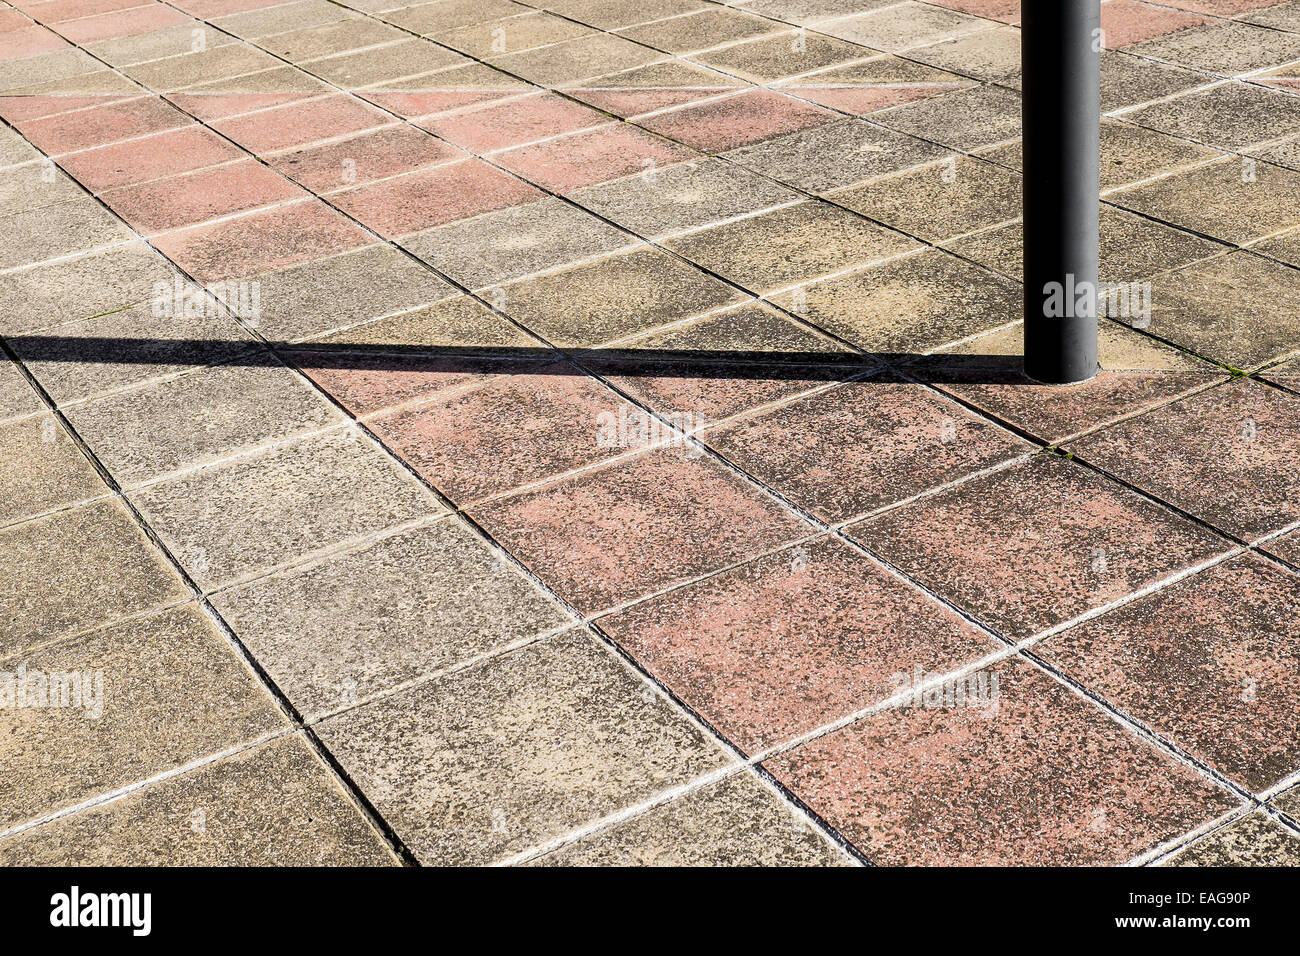 A post casting a shadow across paving slabs. Stock Photo